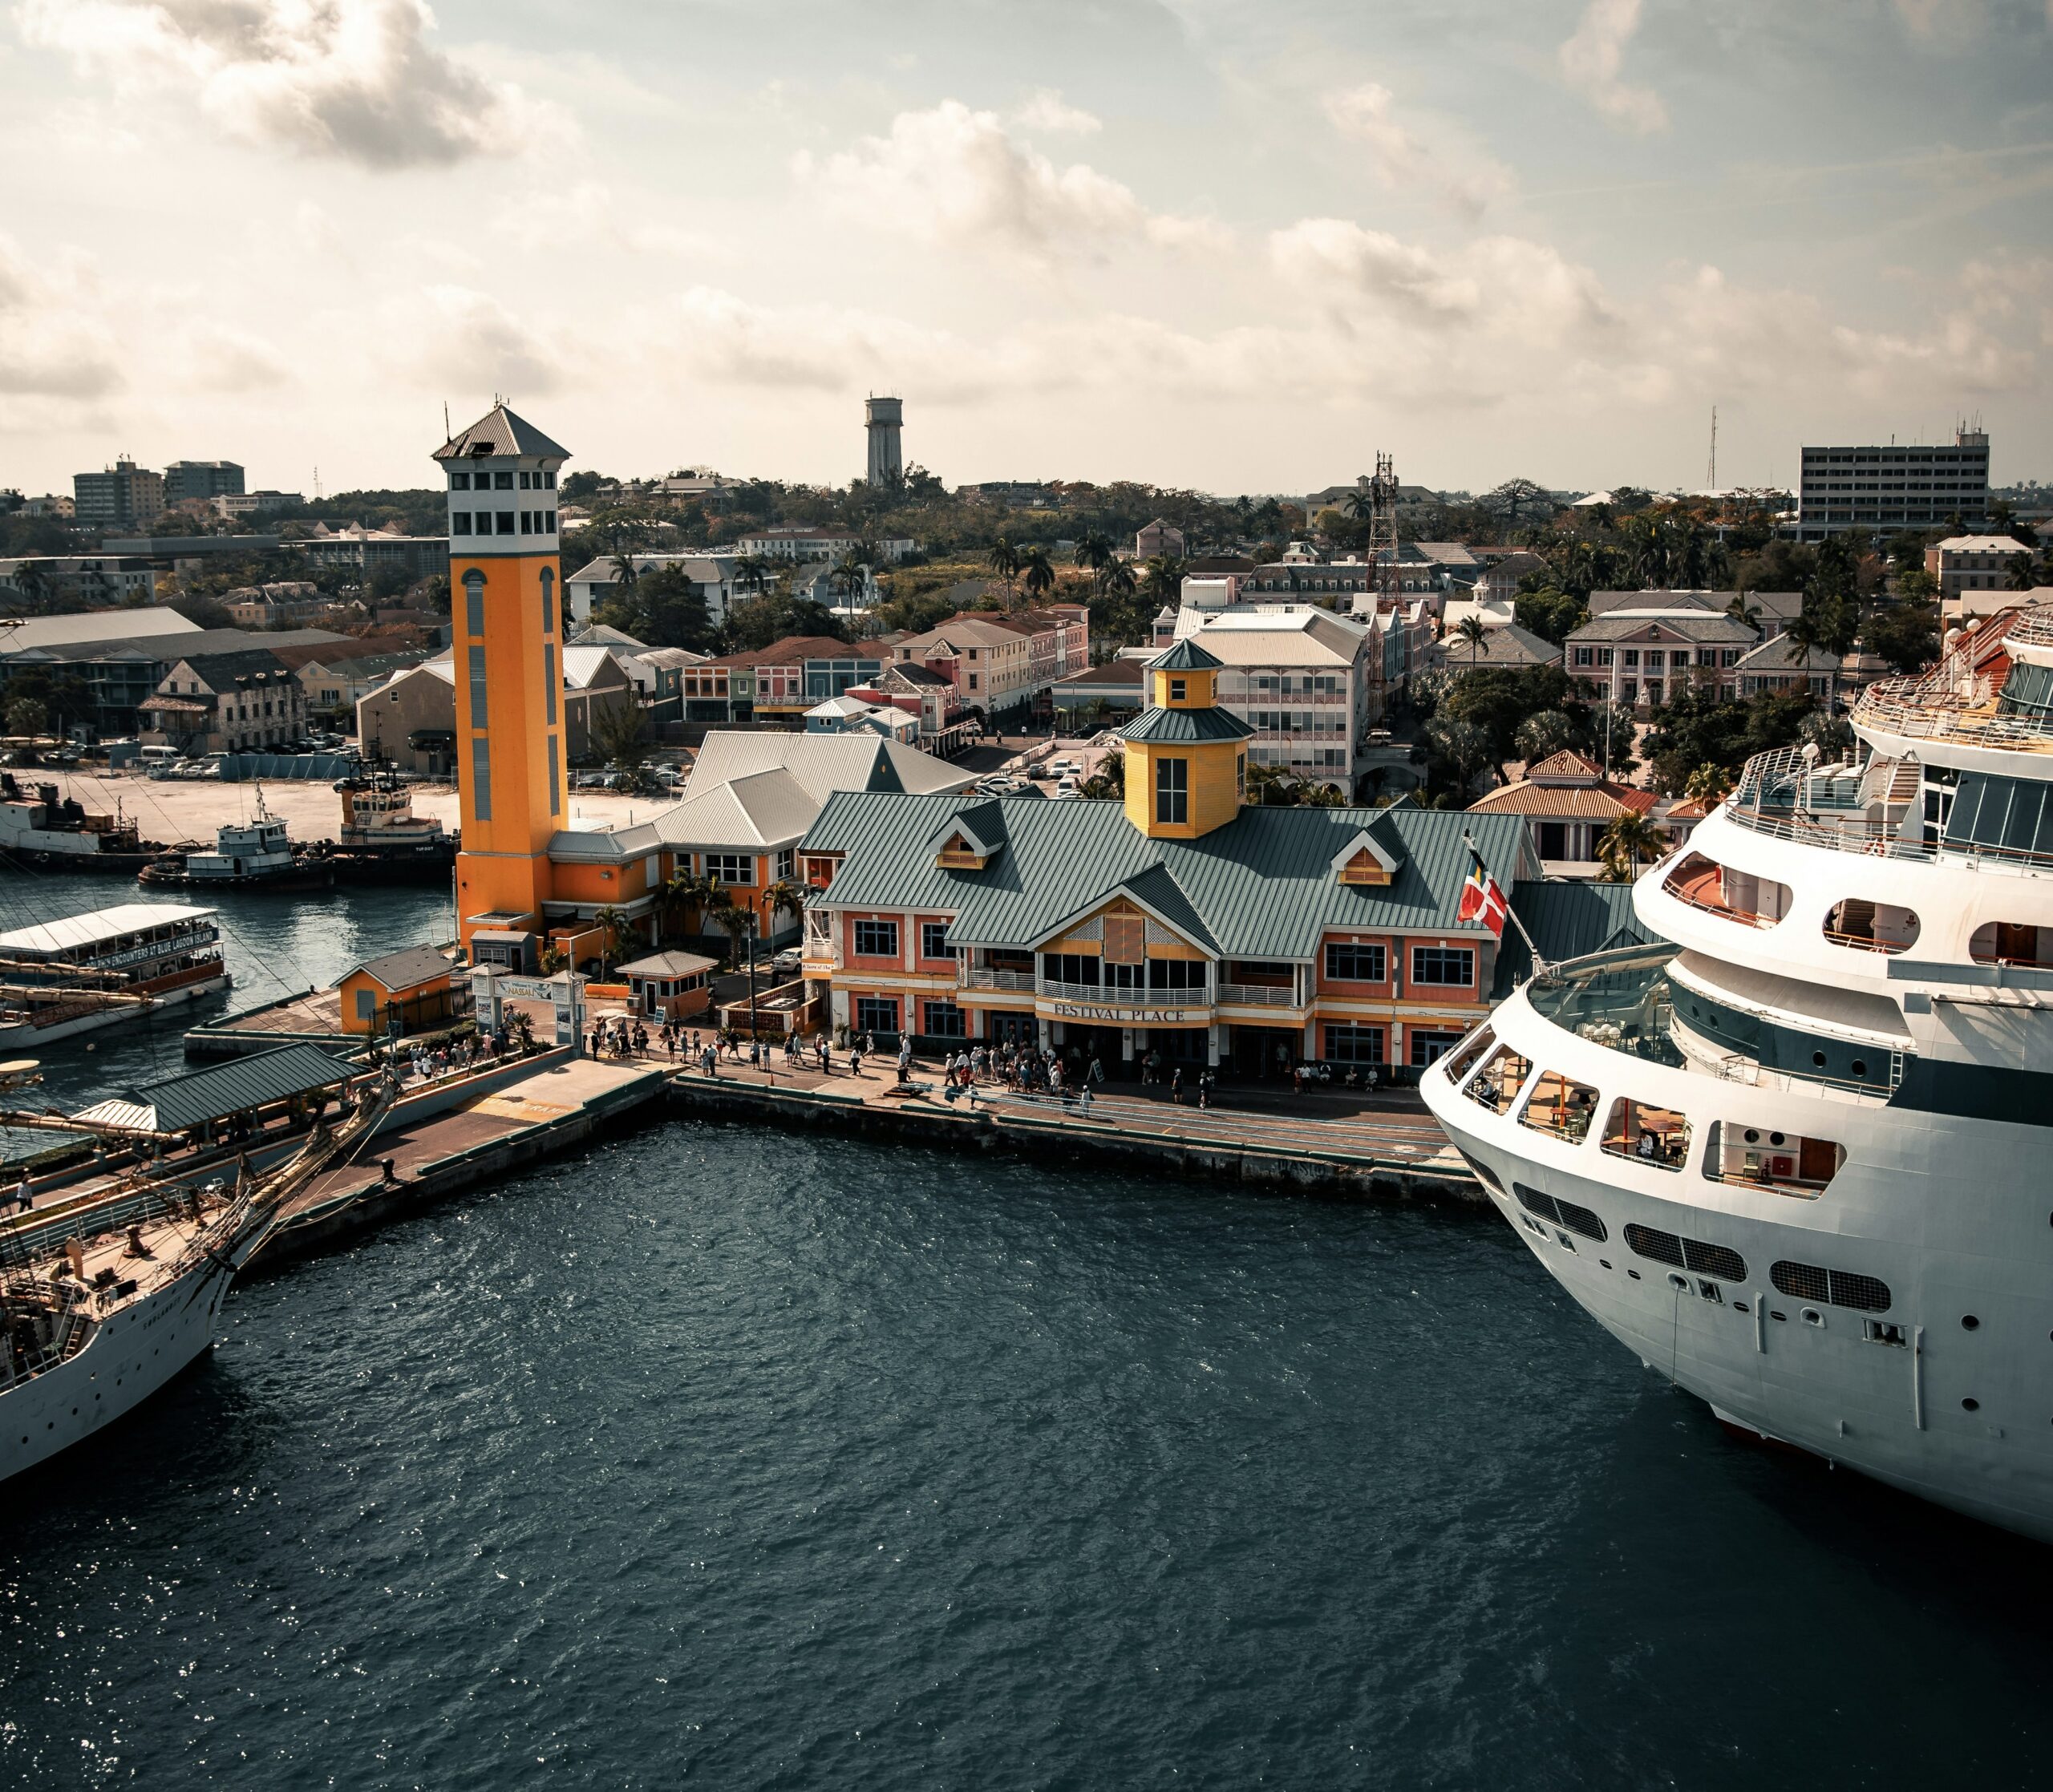 Learn more about how to get around one of the world’s most popular cruise ports. 
Pictured: Nassau’s cruise port with tourists walking around on the dock 